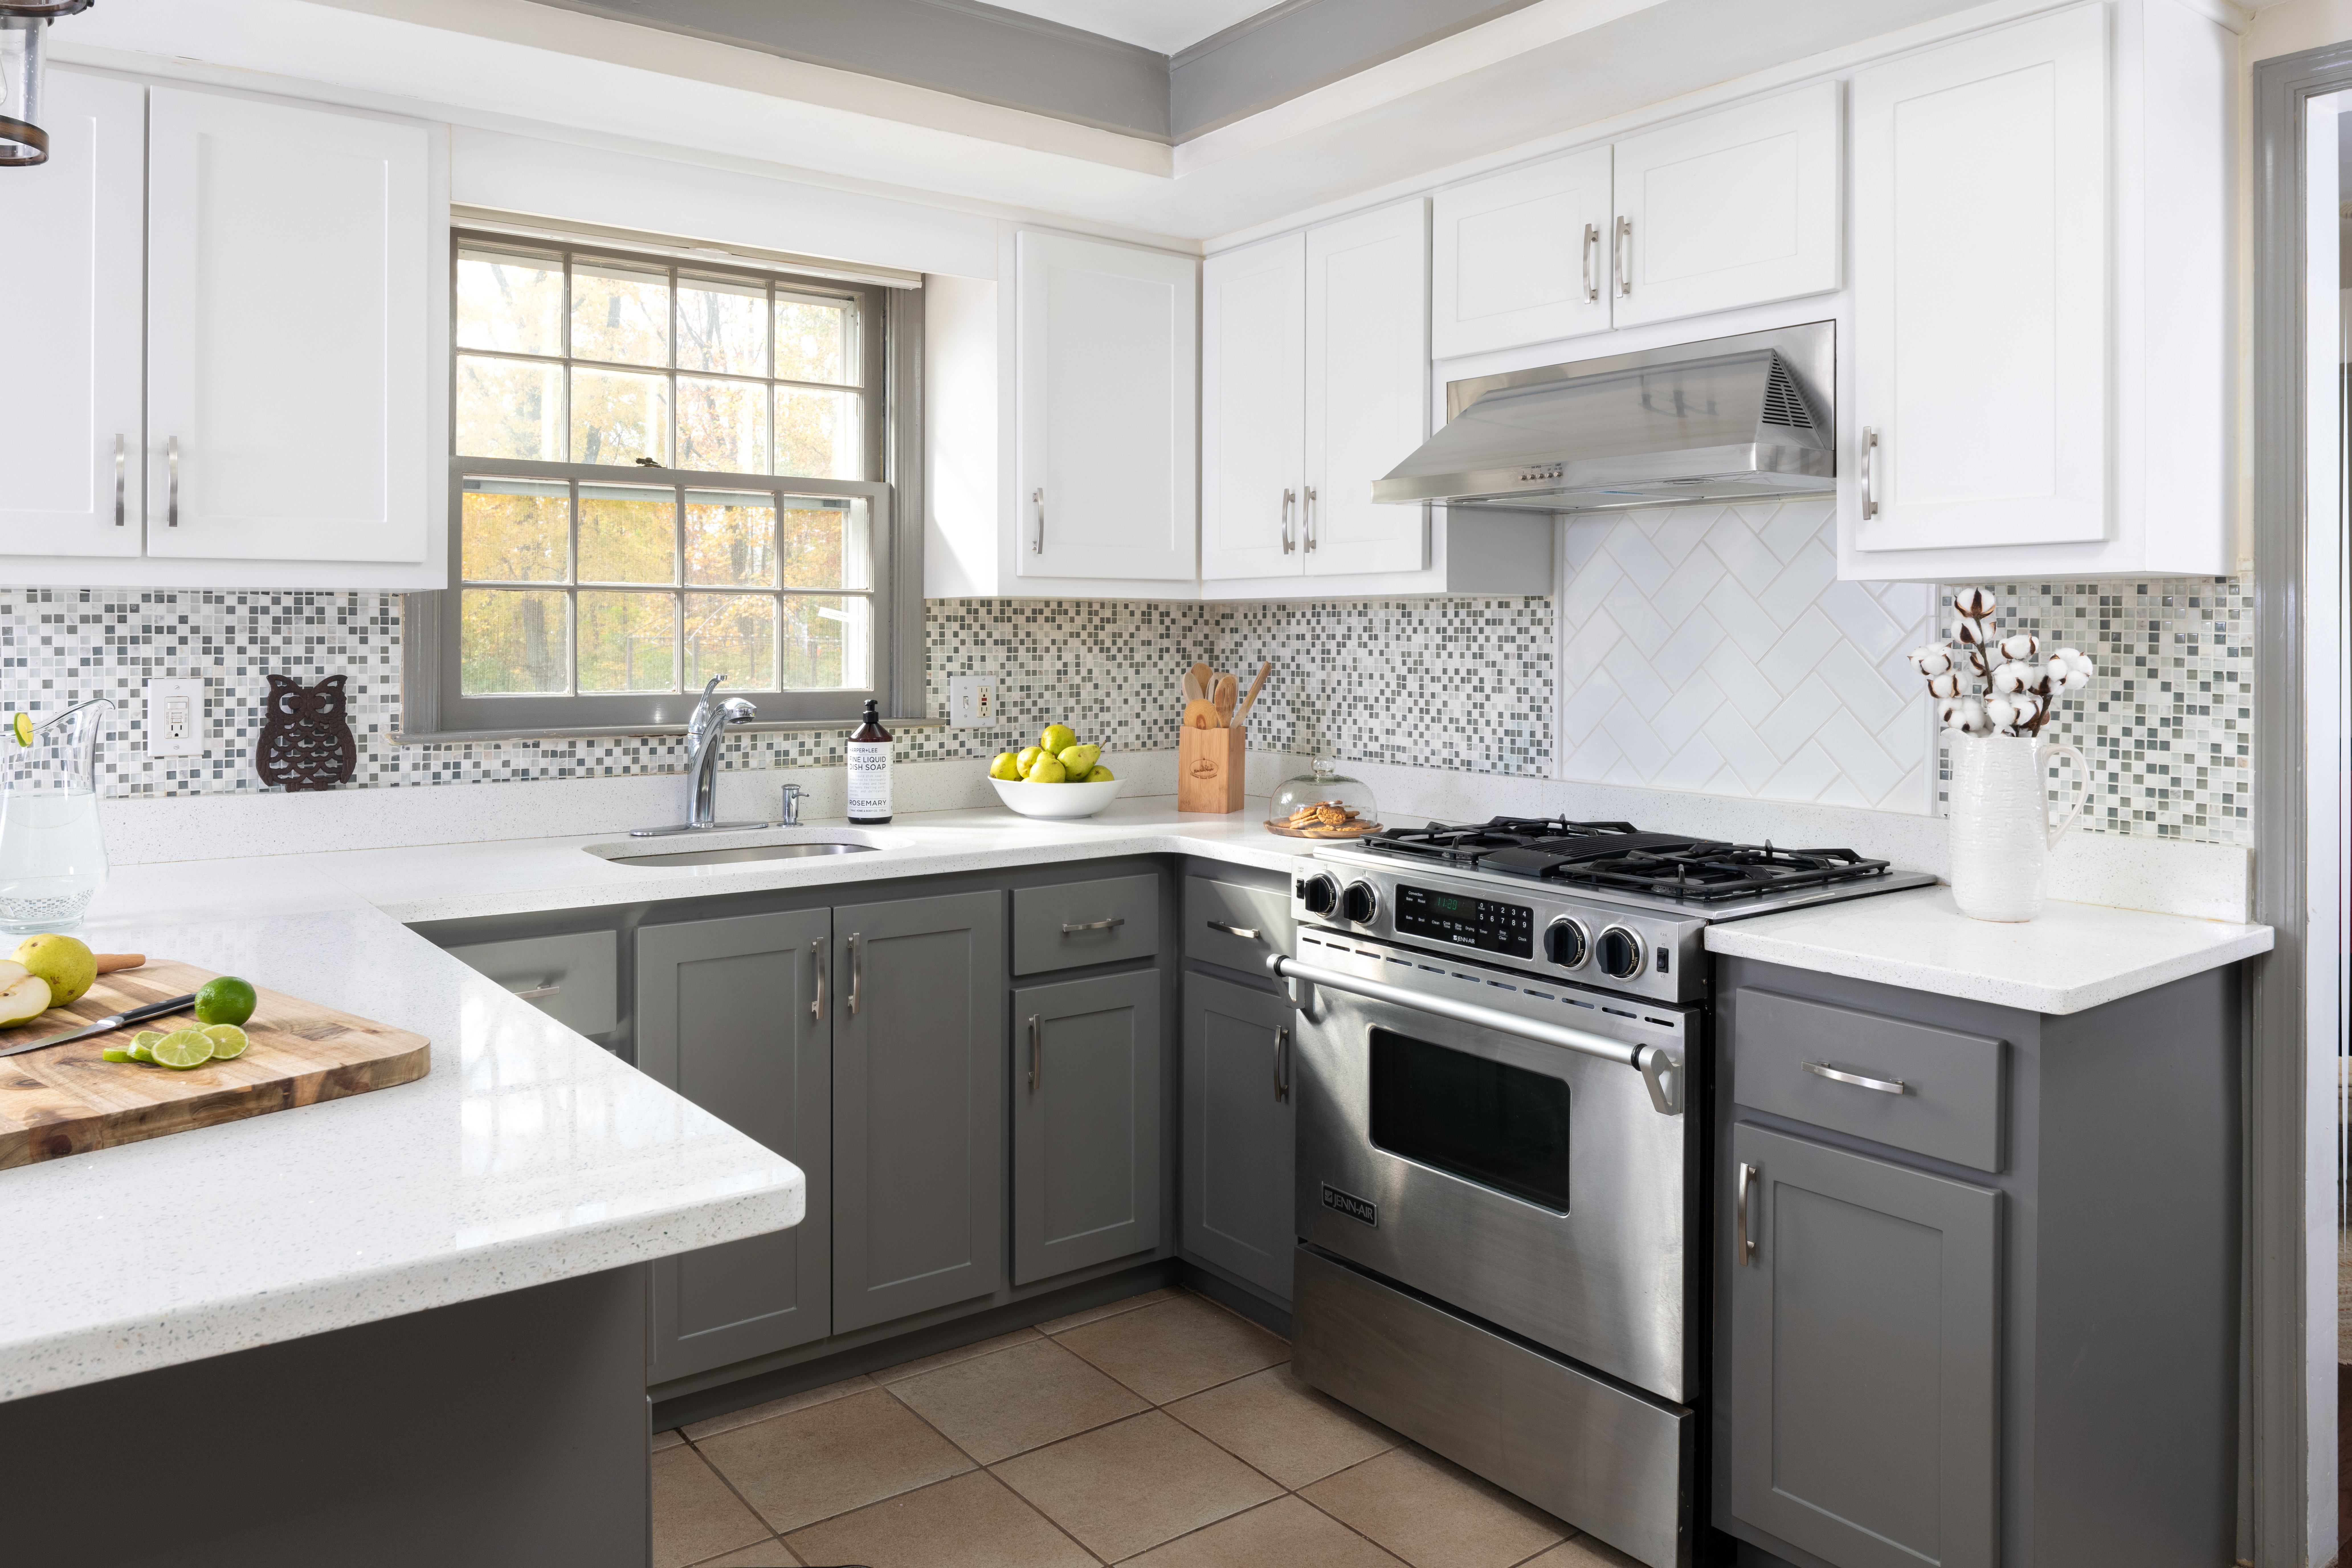 10 Things You Need To Consider Before Getting A Kitchen Renovation in 2021